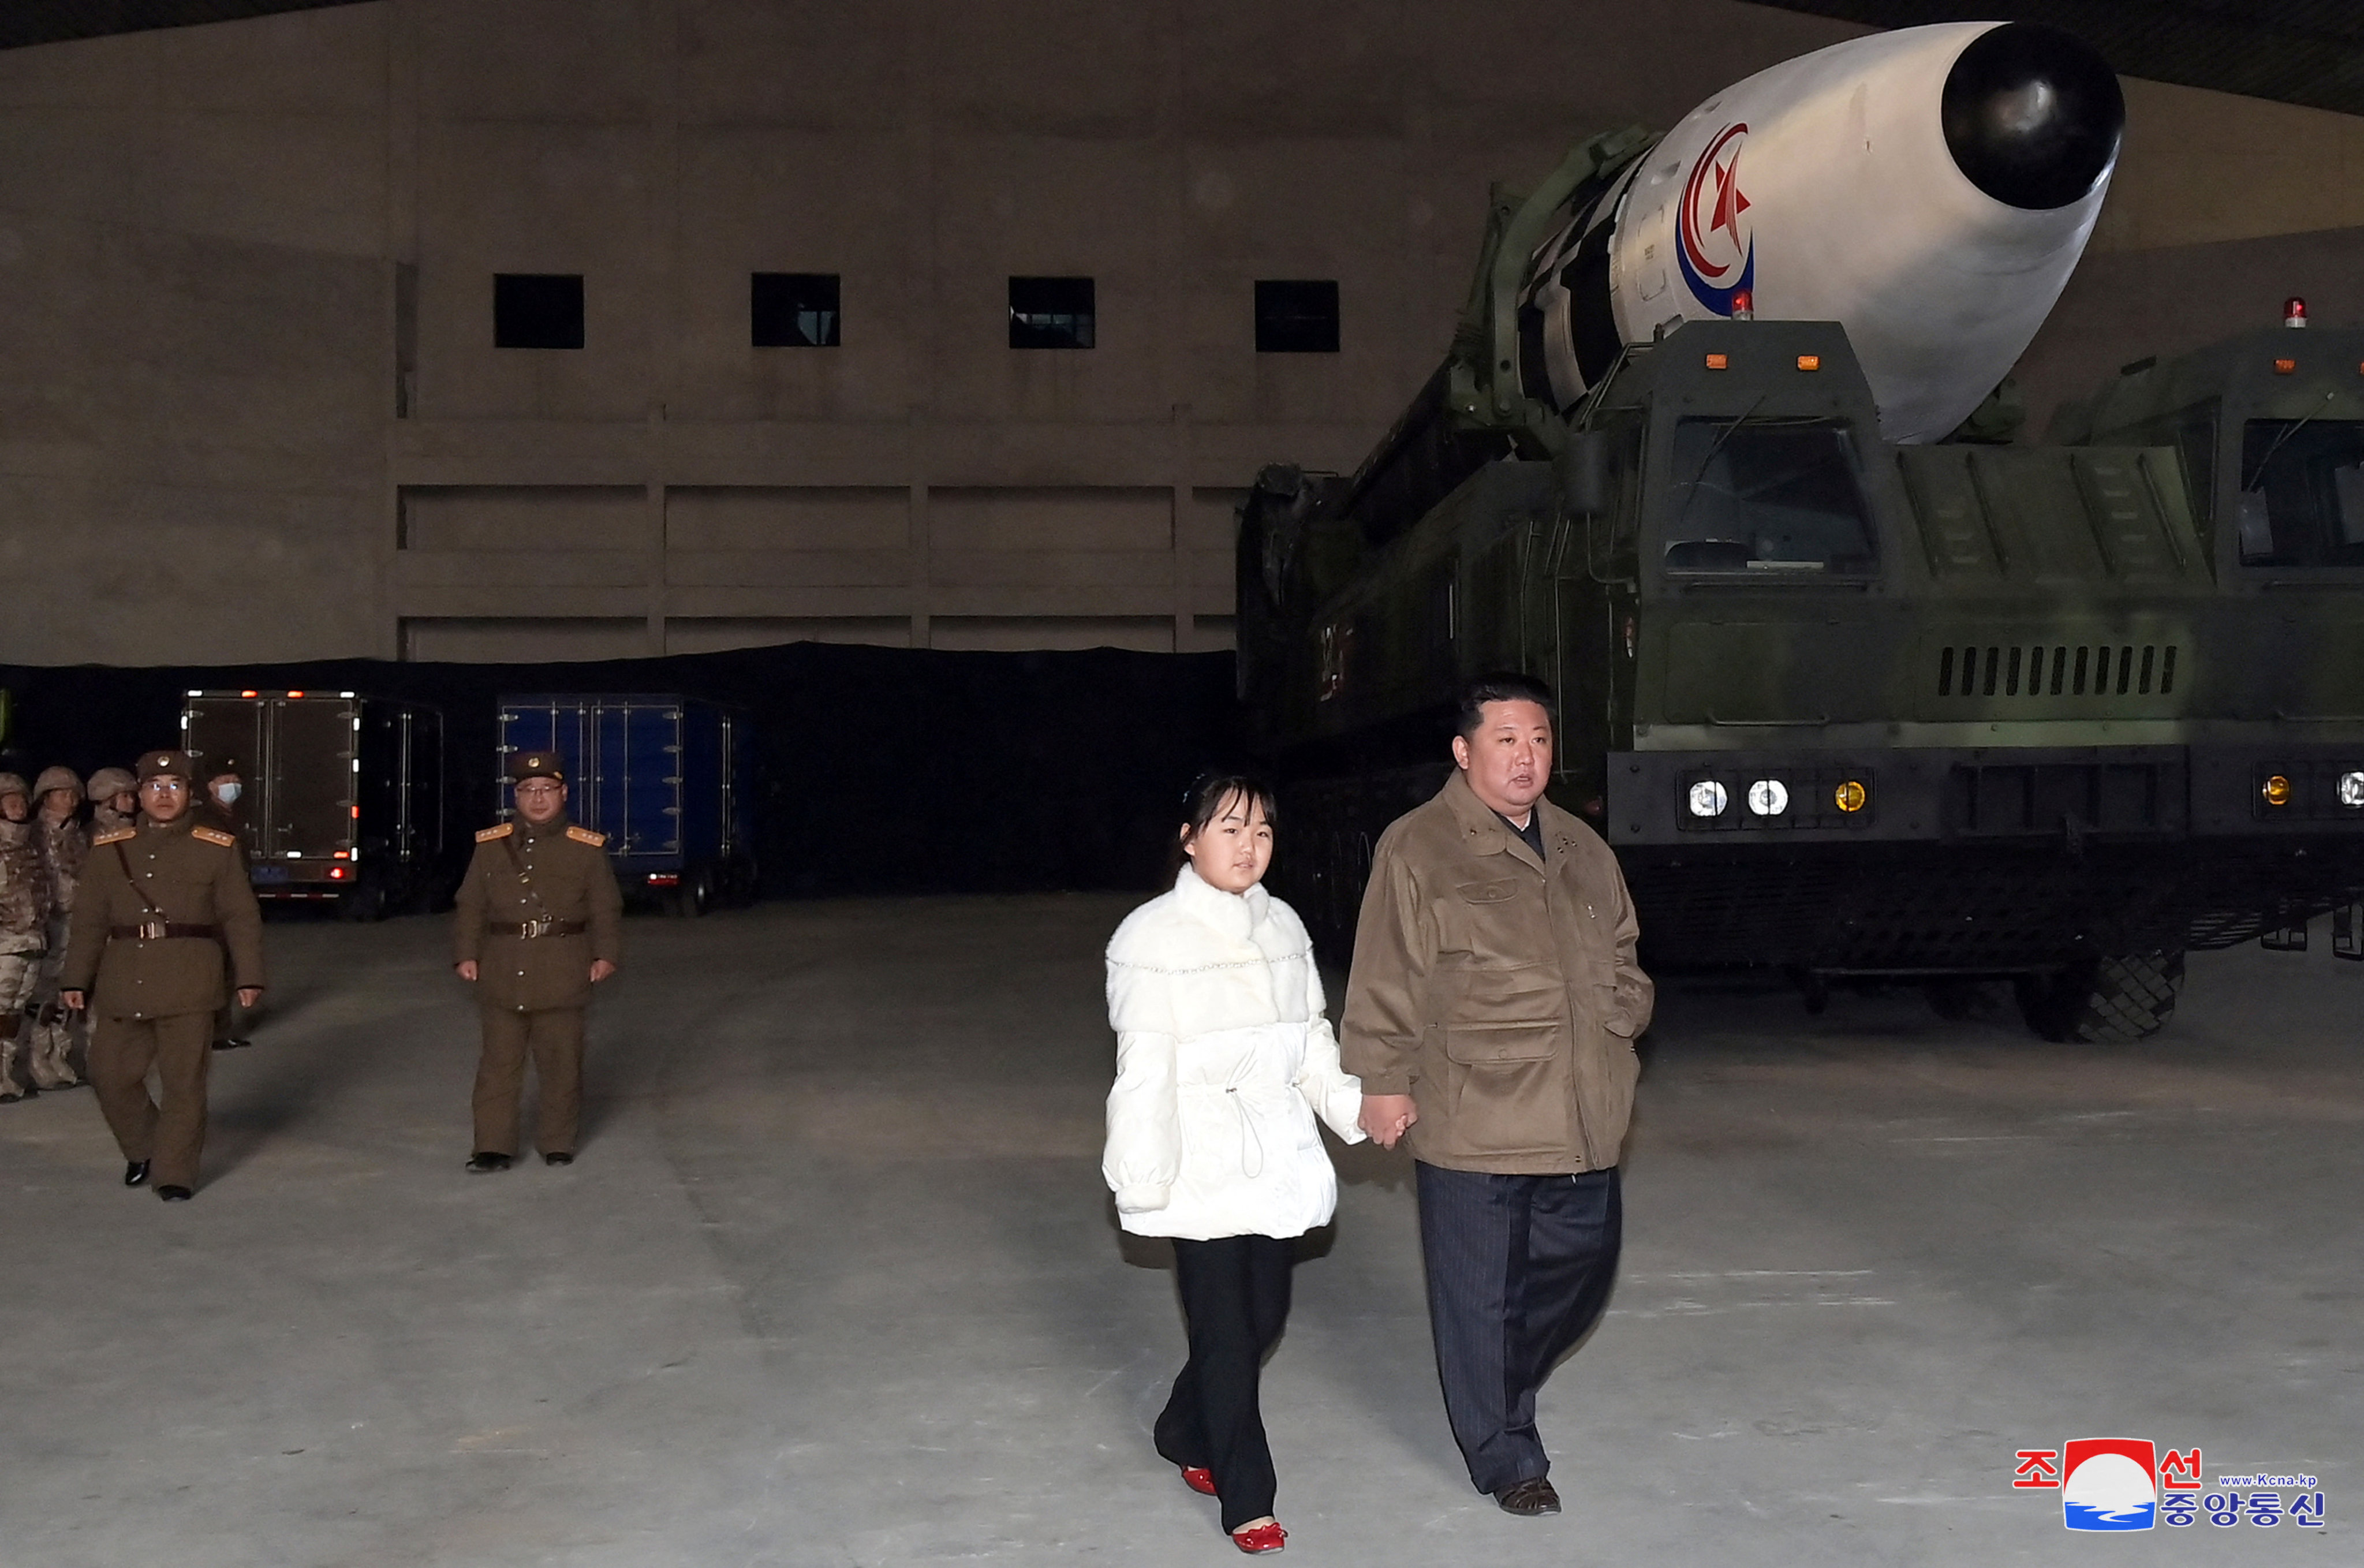 North Korean leader Kim Jong-un, with his daughter, inspects an intercontinental ballistic missile (ICBM) in this photo released on Saturday. Photo:  KCNA via Reuters